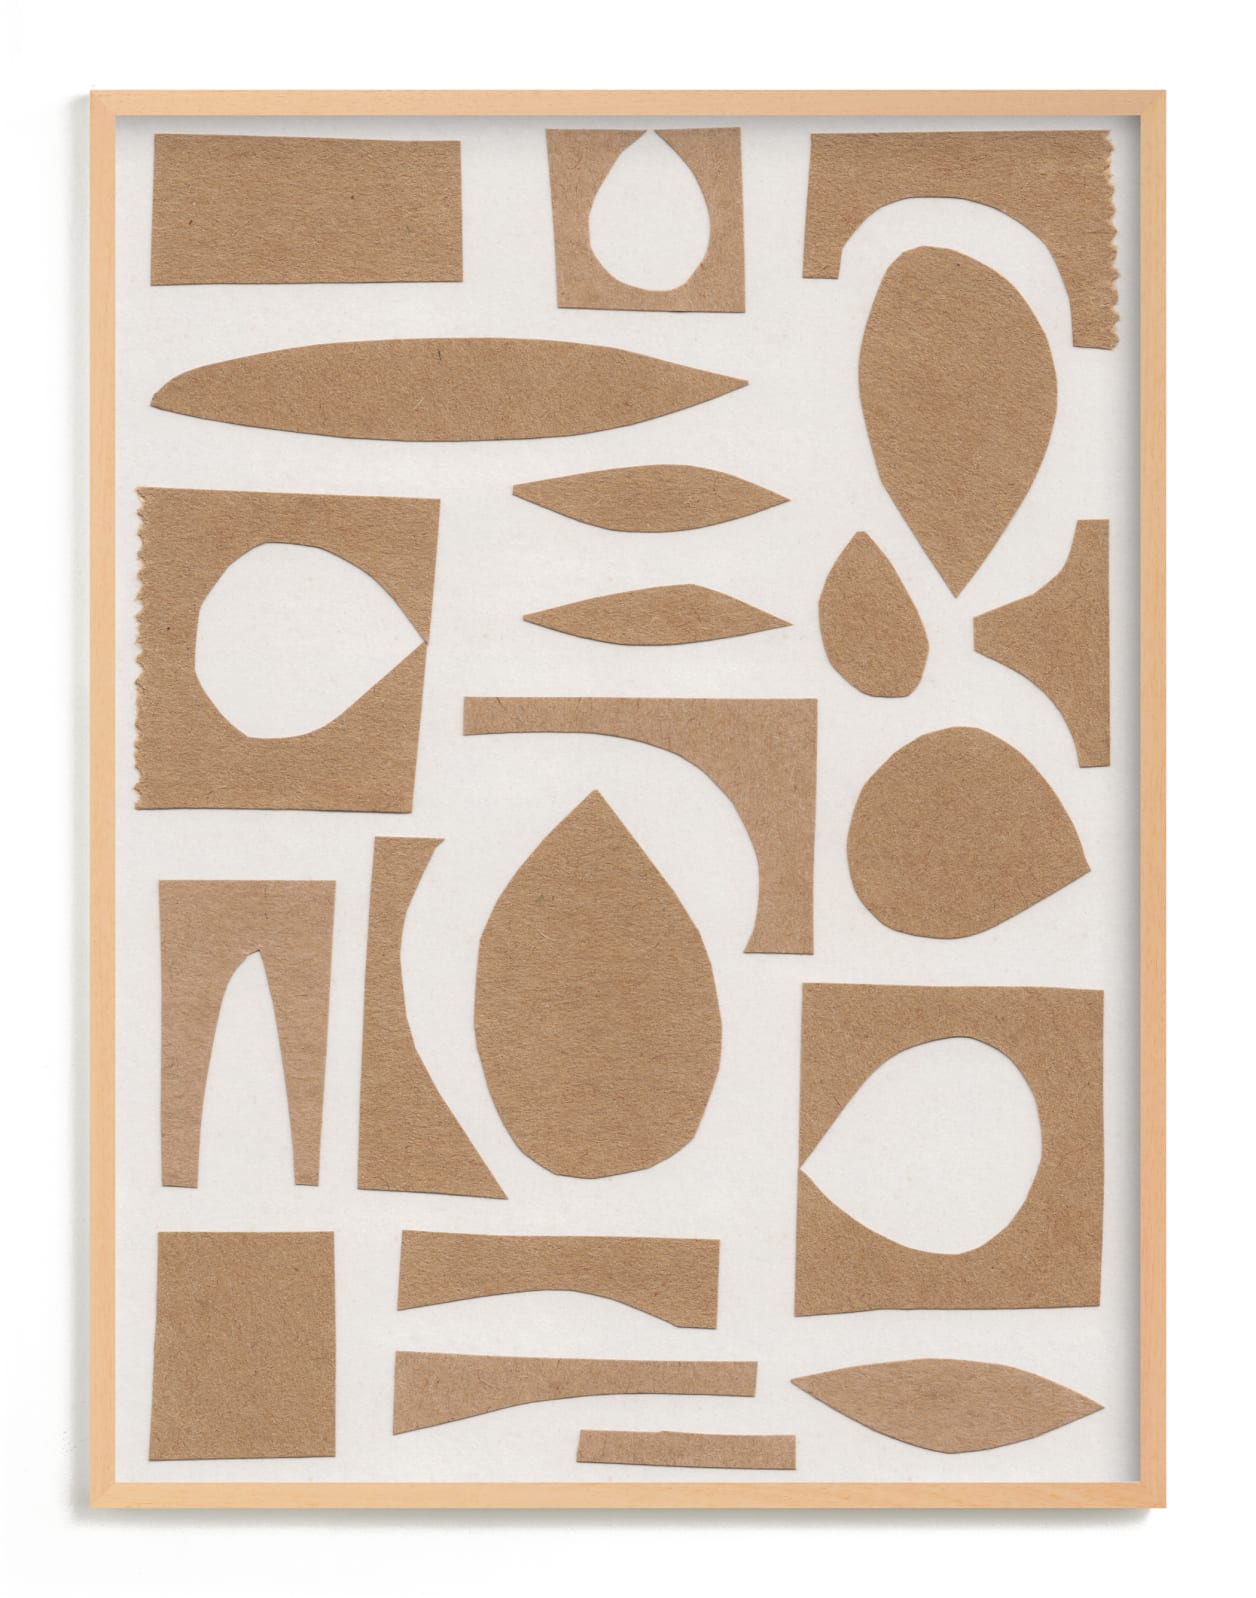 Shop Paper Cut-outs Walnut Wood Frame | 30"x40" | Quantity: 1 from Minted on Openhaus